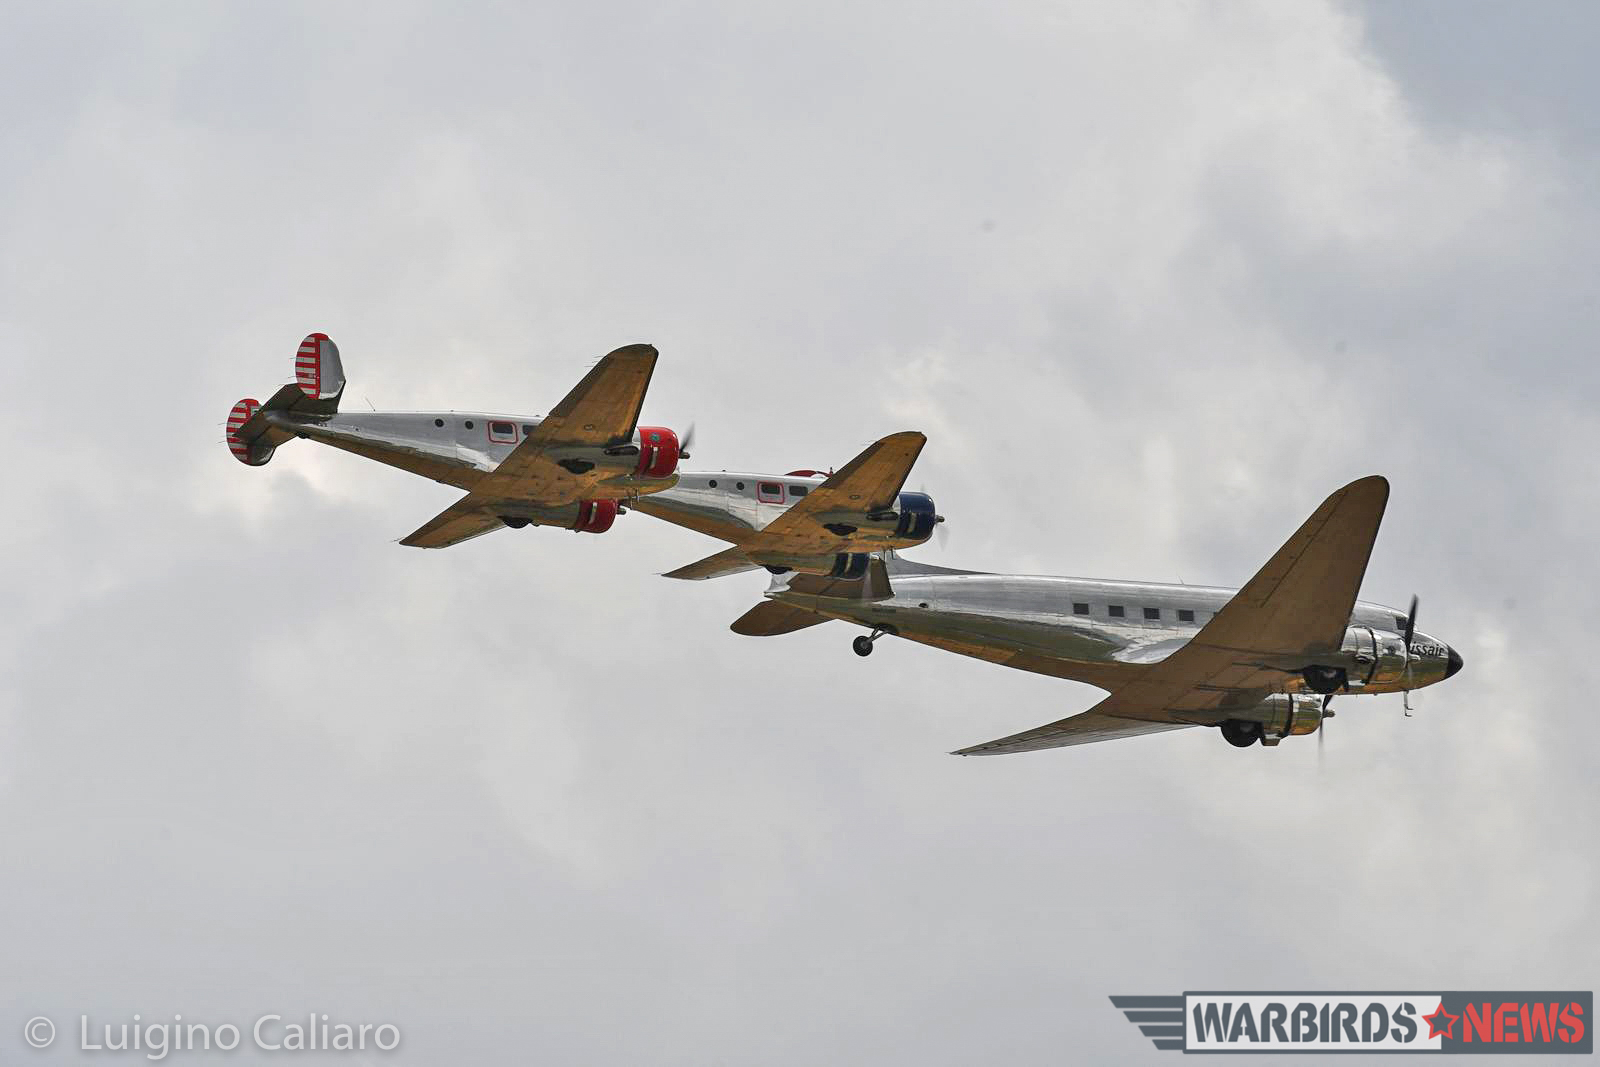 The Swissair DC-3 flies in tight formation with a pair of similarly-polished Beech Model 18s. (photo by Luigino Caliaro)